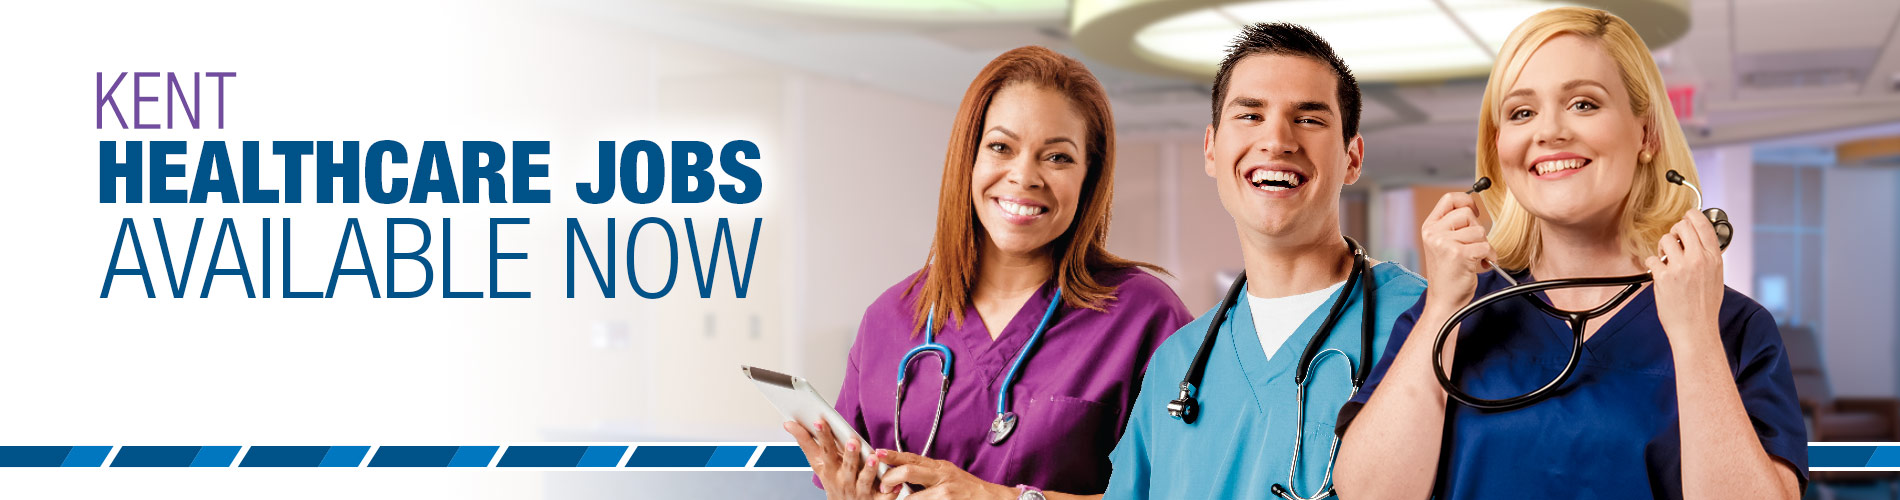 Home Page Kent Heathcare Jobs Banner